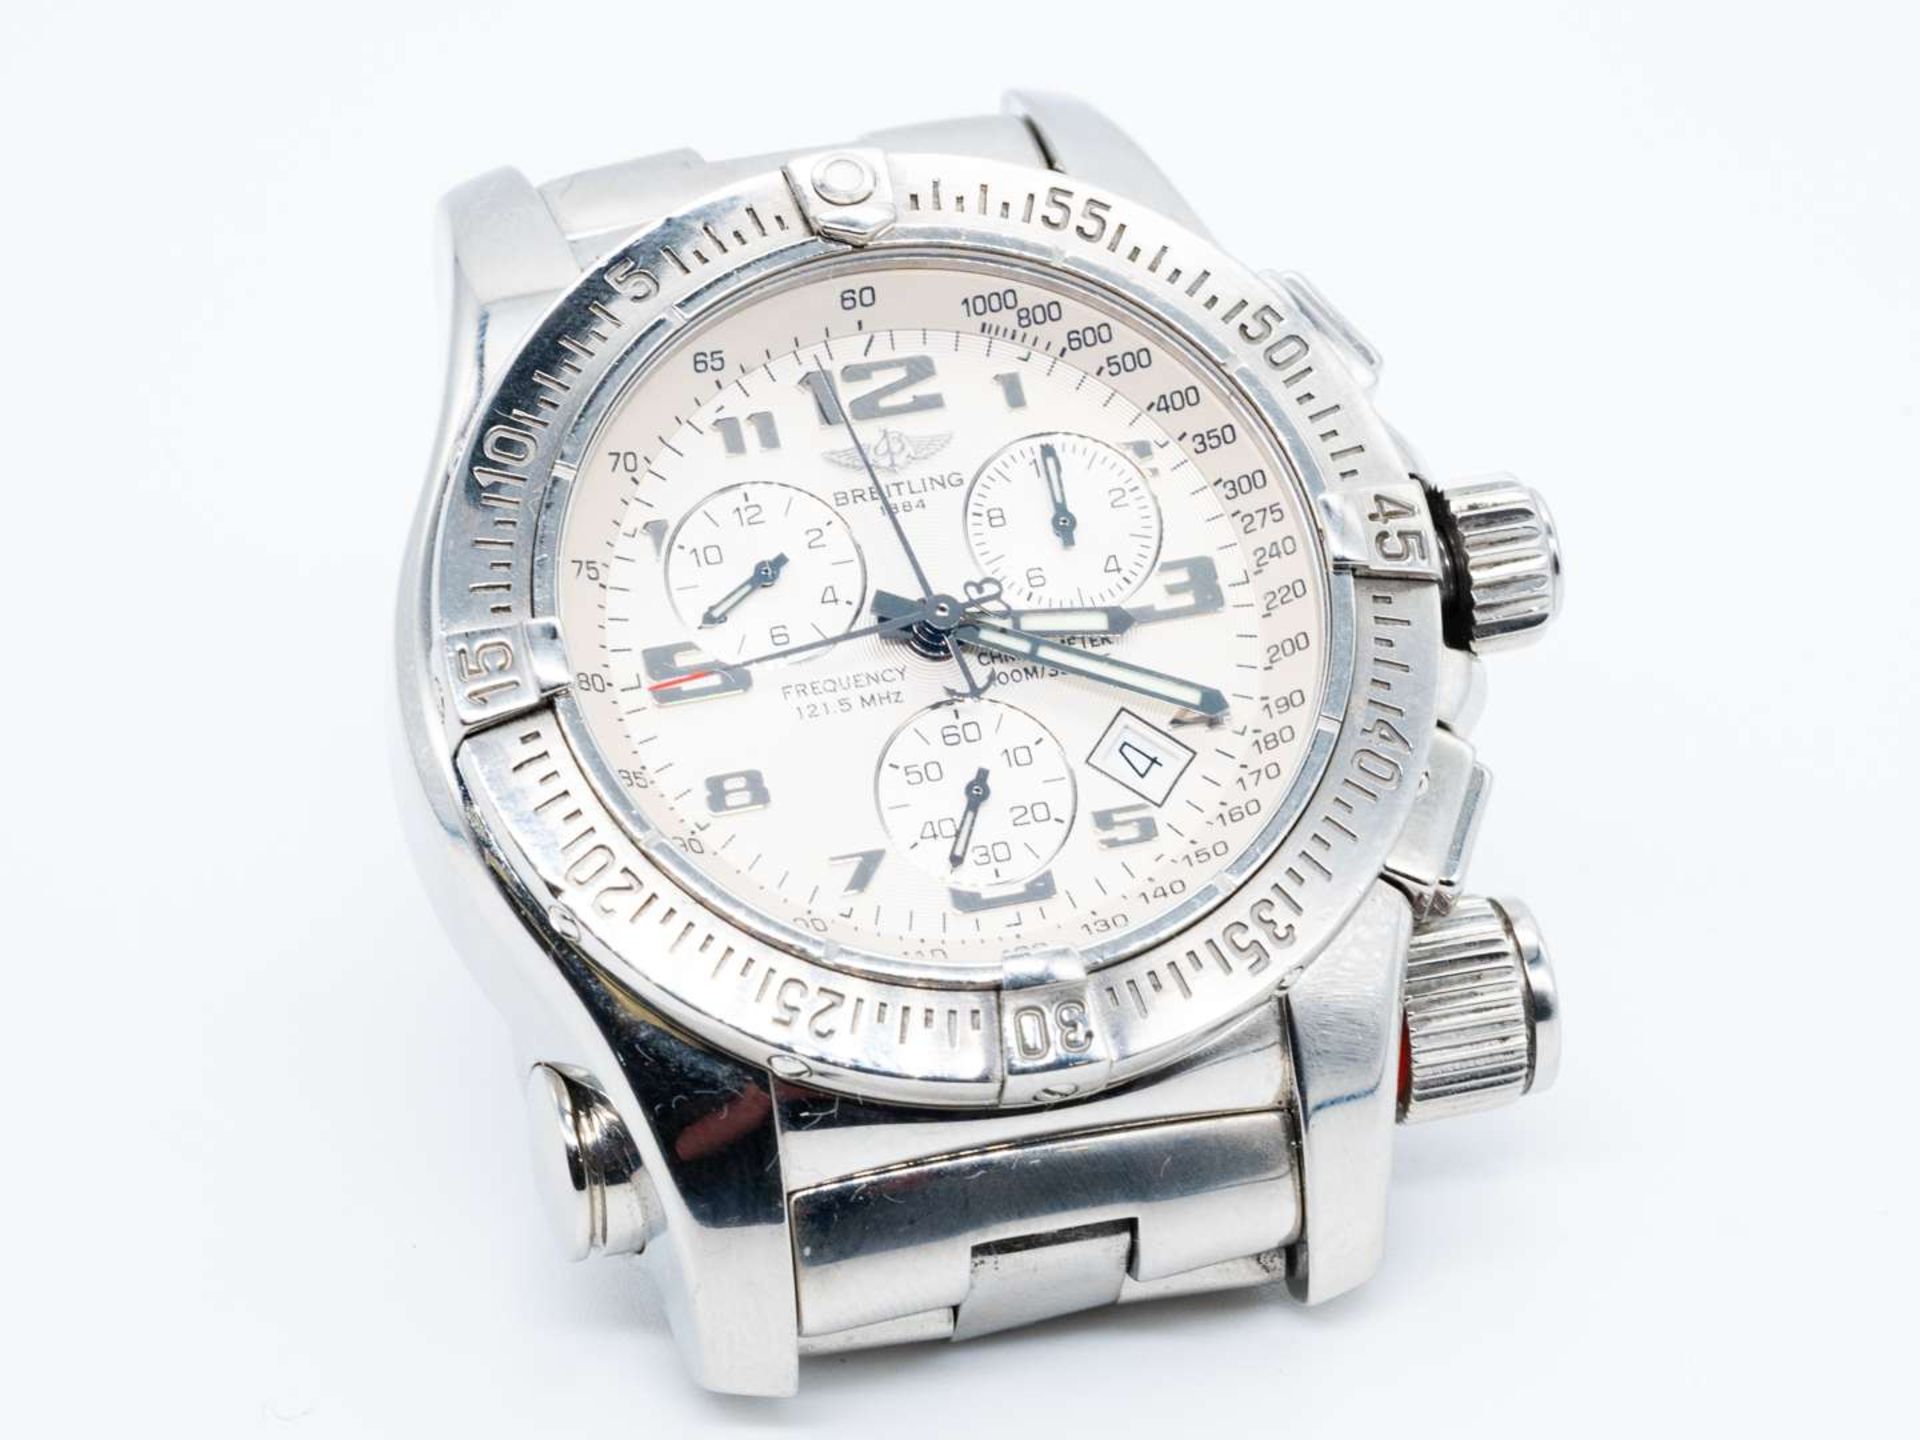 BREITLING, Emergency, stainless steel, quartz, 121.5MHz, two button chronograph wristwatch. - Image 2 of 8